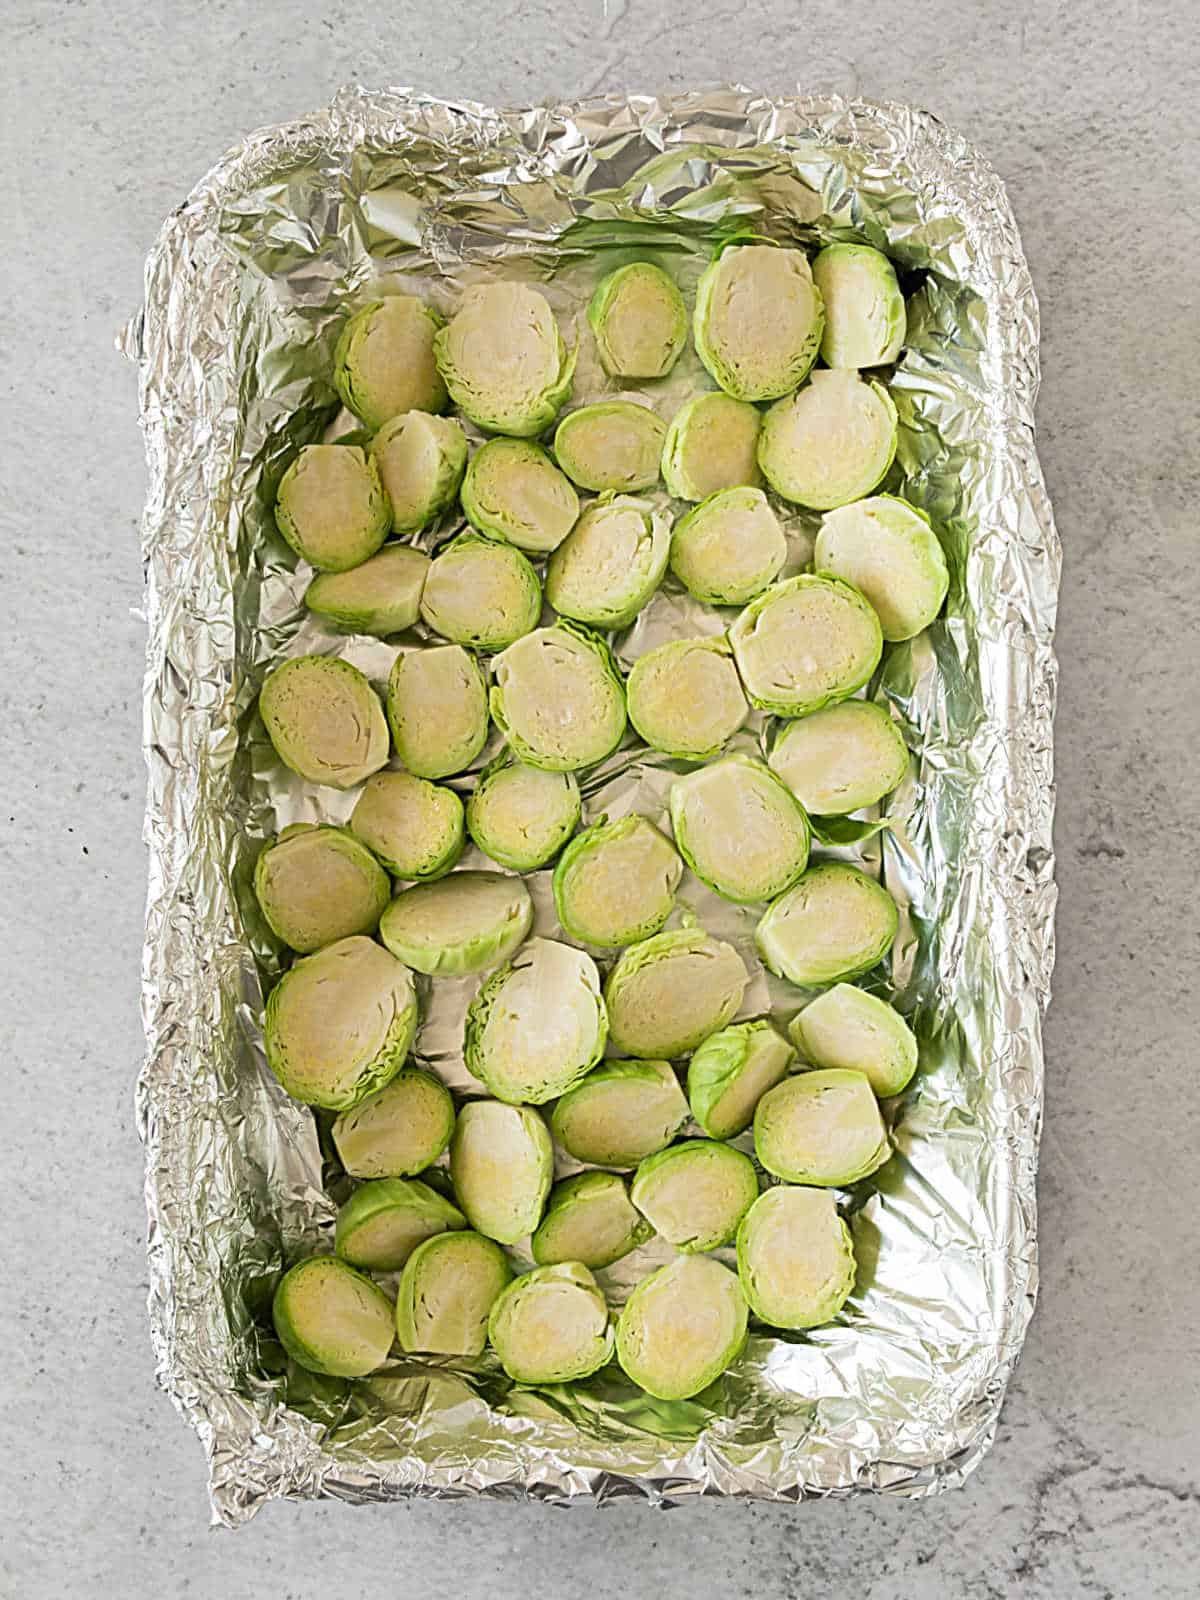 Halved raw Brussels sprouts in a foil lined pan on a light grey surface.